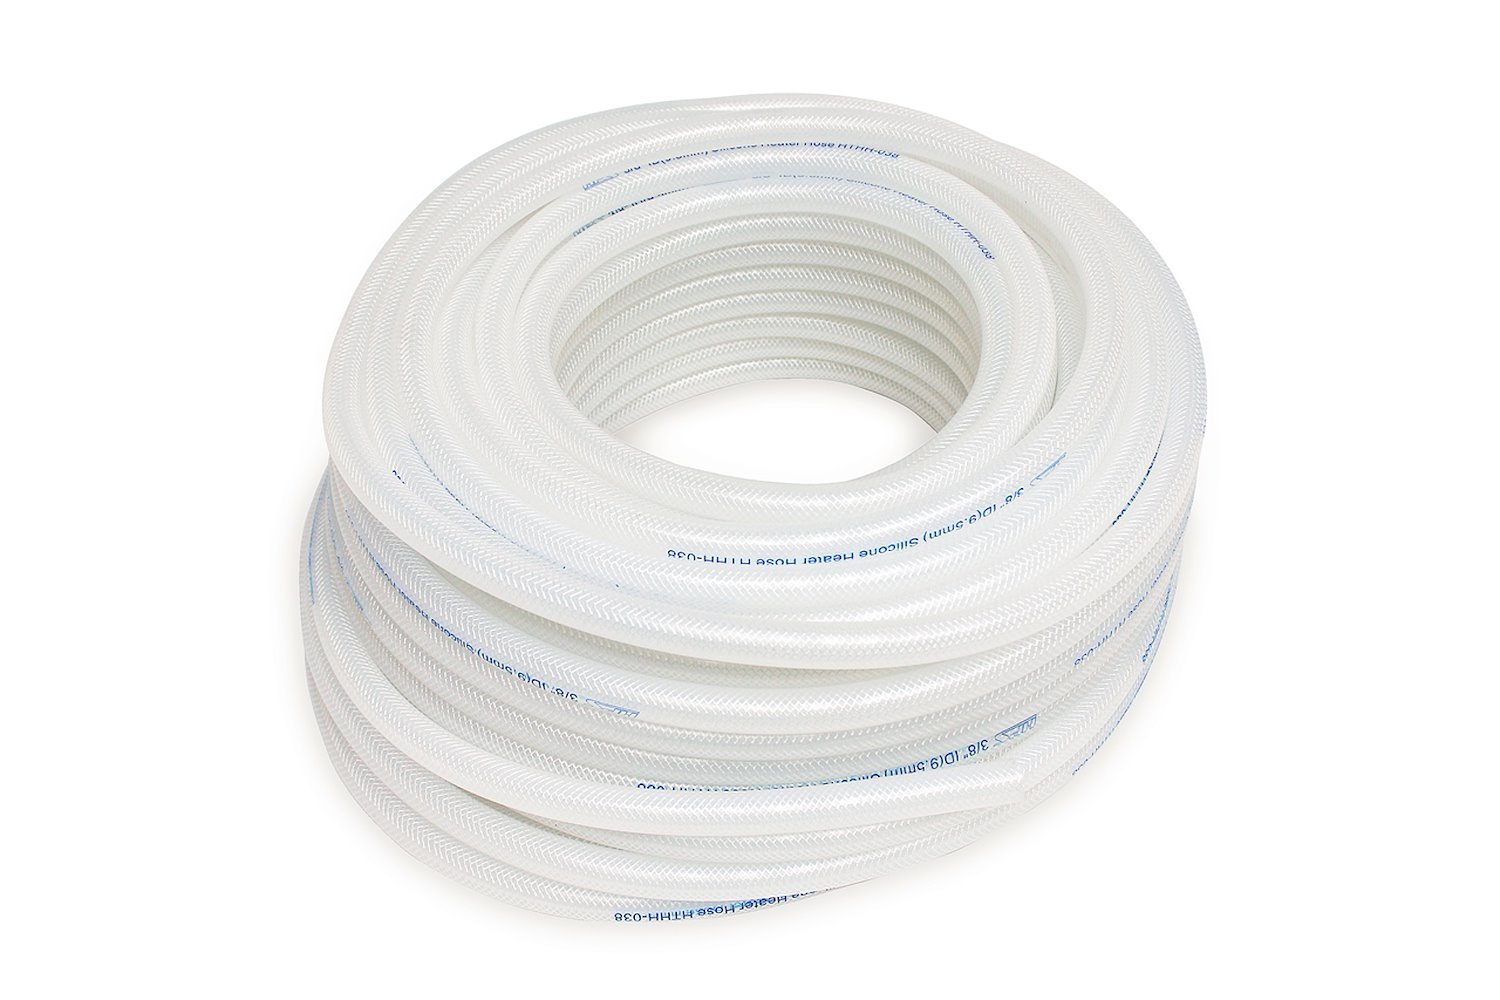 HTHH-038-CLEARx25 Silicone Heater Hose Tubing, High-Temp Reinforced, 3/8 in. ID, 25 ft. Roll, Clear